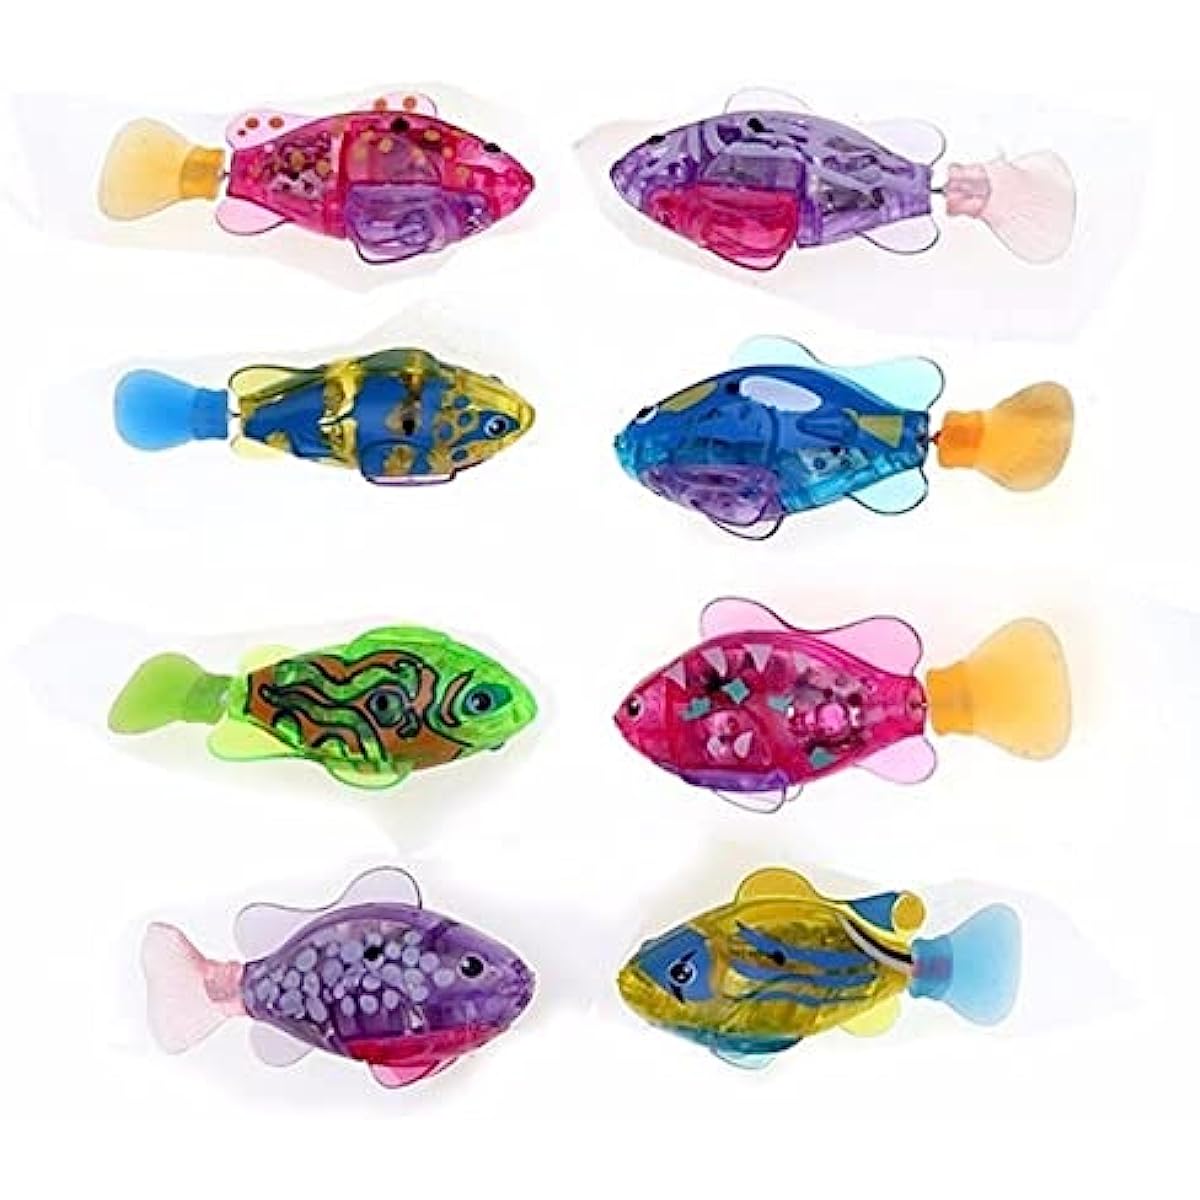 Novelty Toys Electronic Fish Baby Summer Bath Toy Pet Cat Swimming Robot Fishes with LED Light Water Swim Pool Bathtub Game Christmas Birthday Gifts